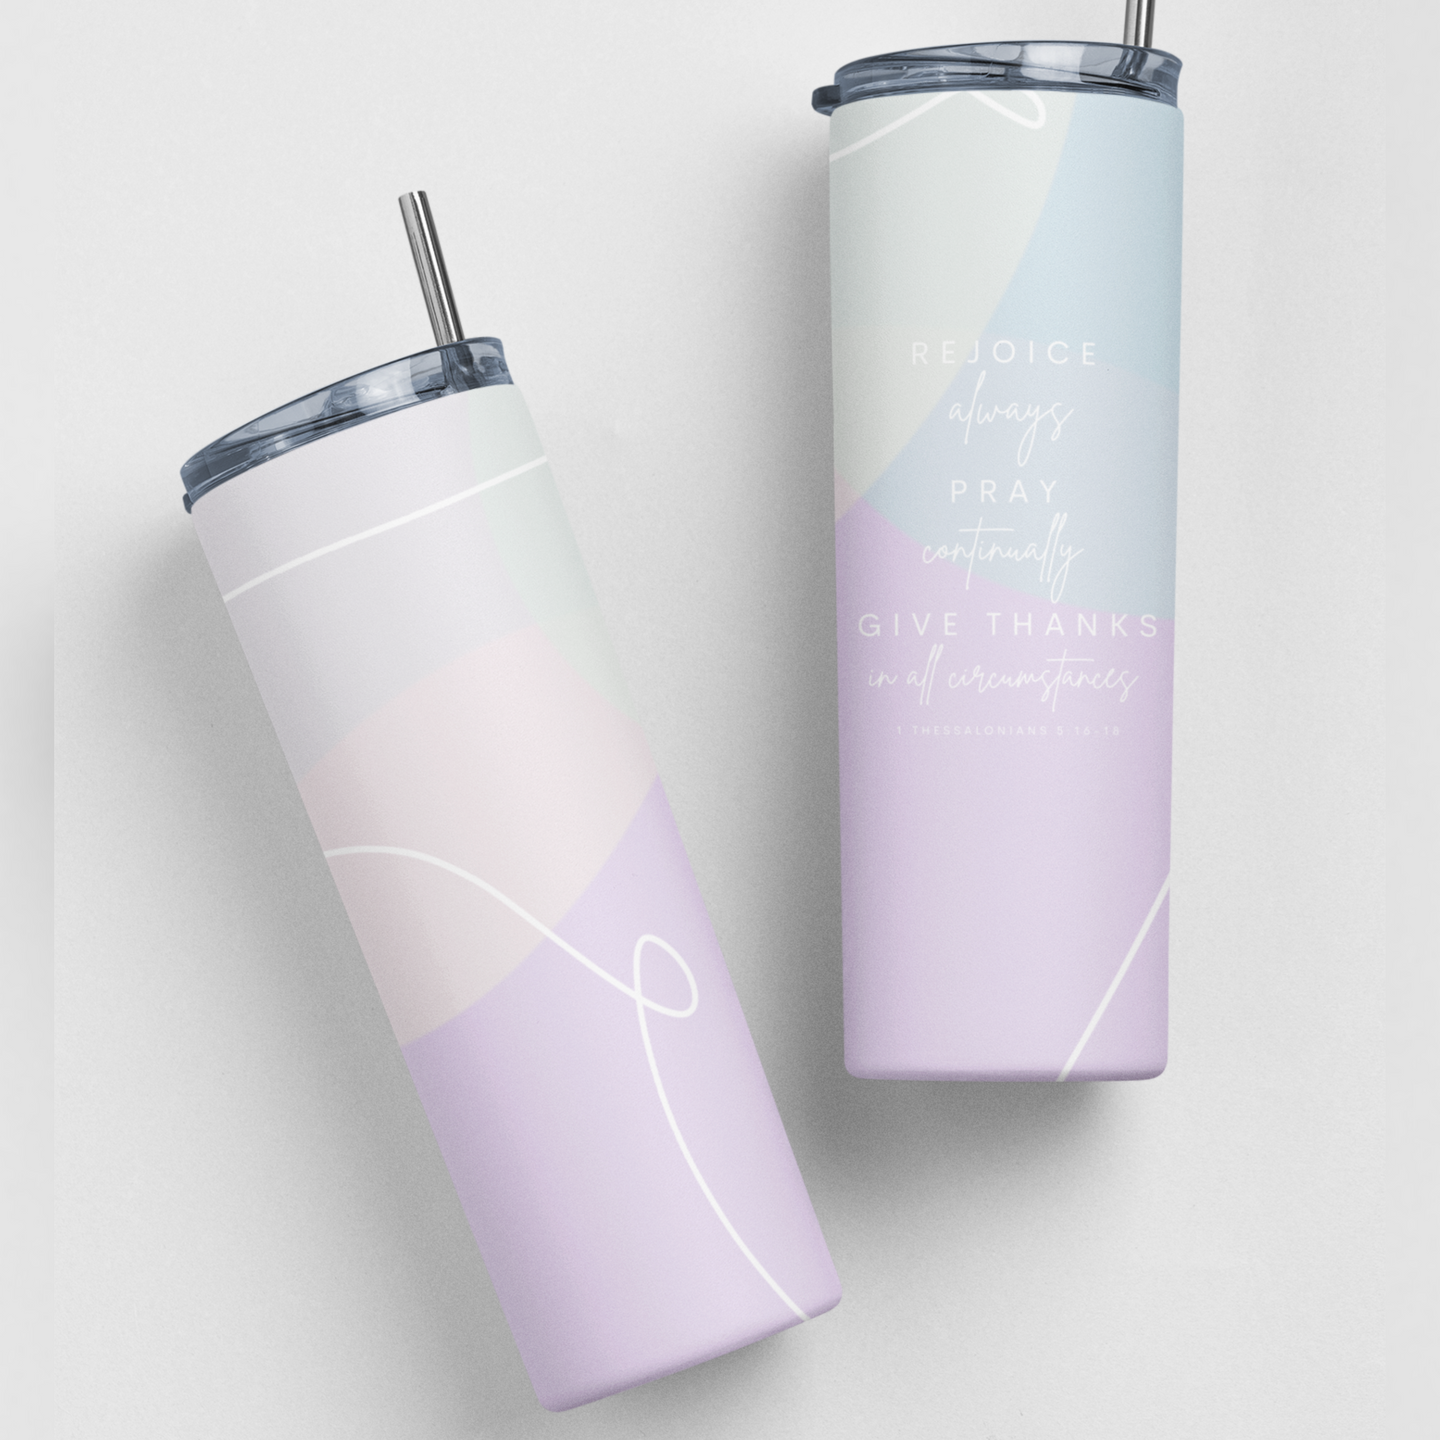 Rejoice Always Bible Verse Pastel Stainless Steel Double-Wall Vacuum Sealed Insulated 20oz. Travel Tumbler With Straw For Hot or Cold Beverages